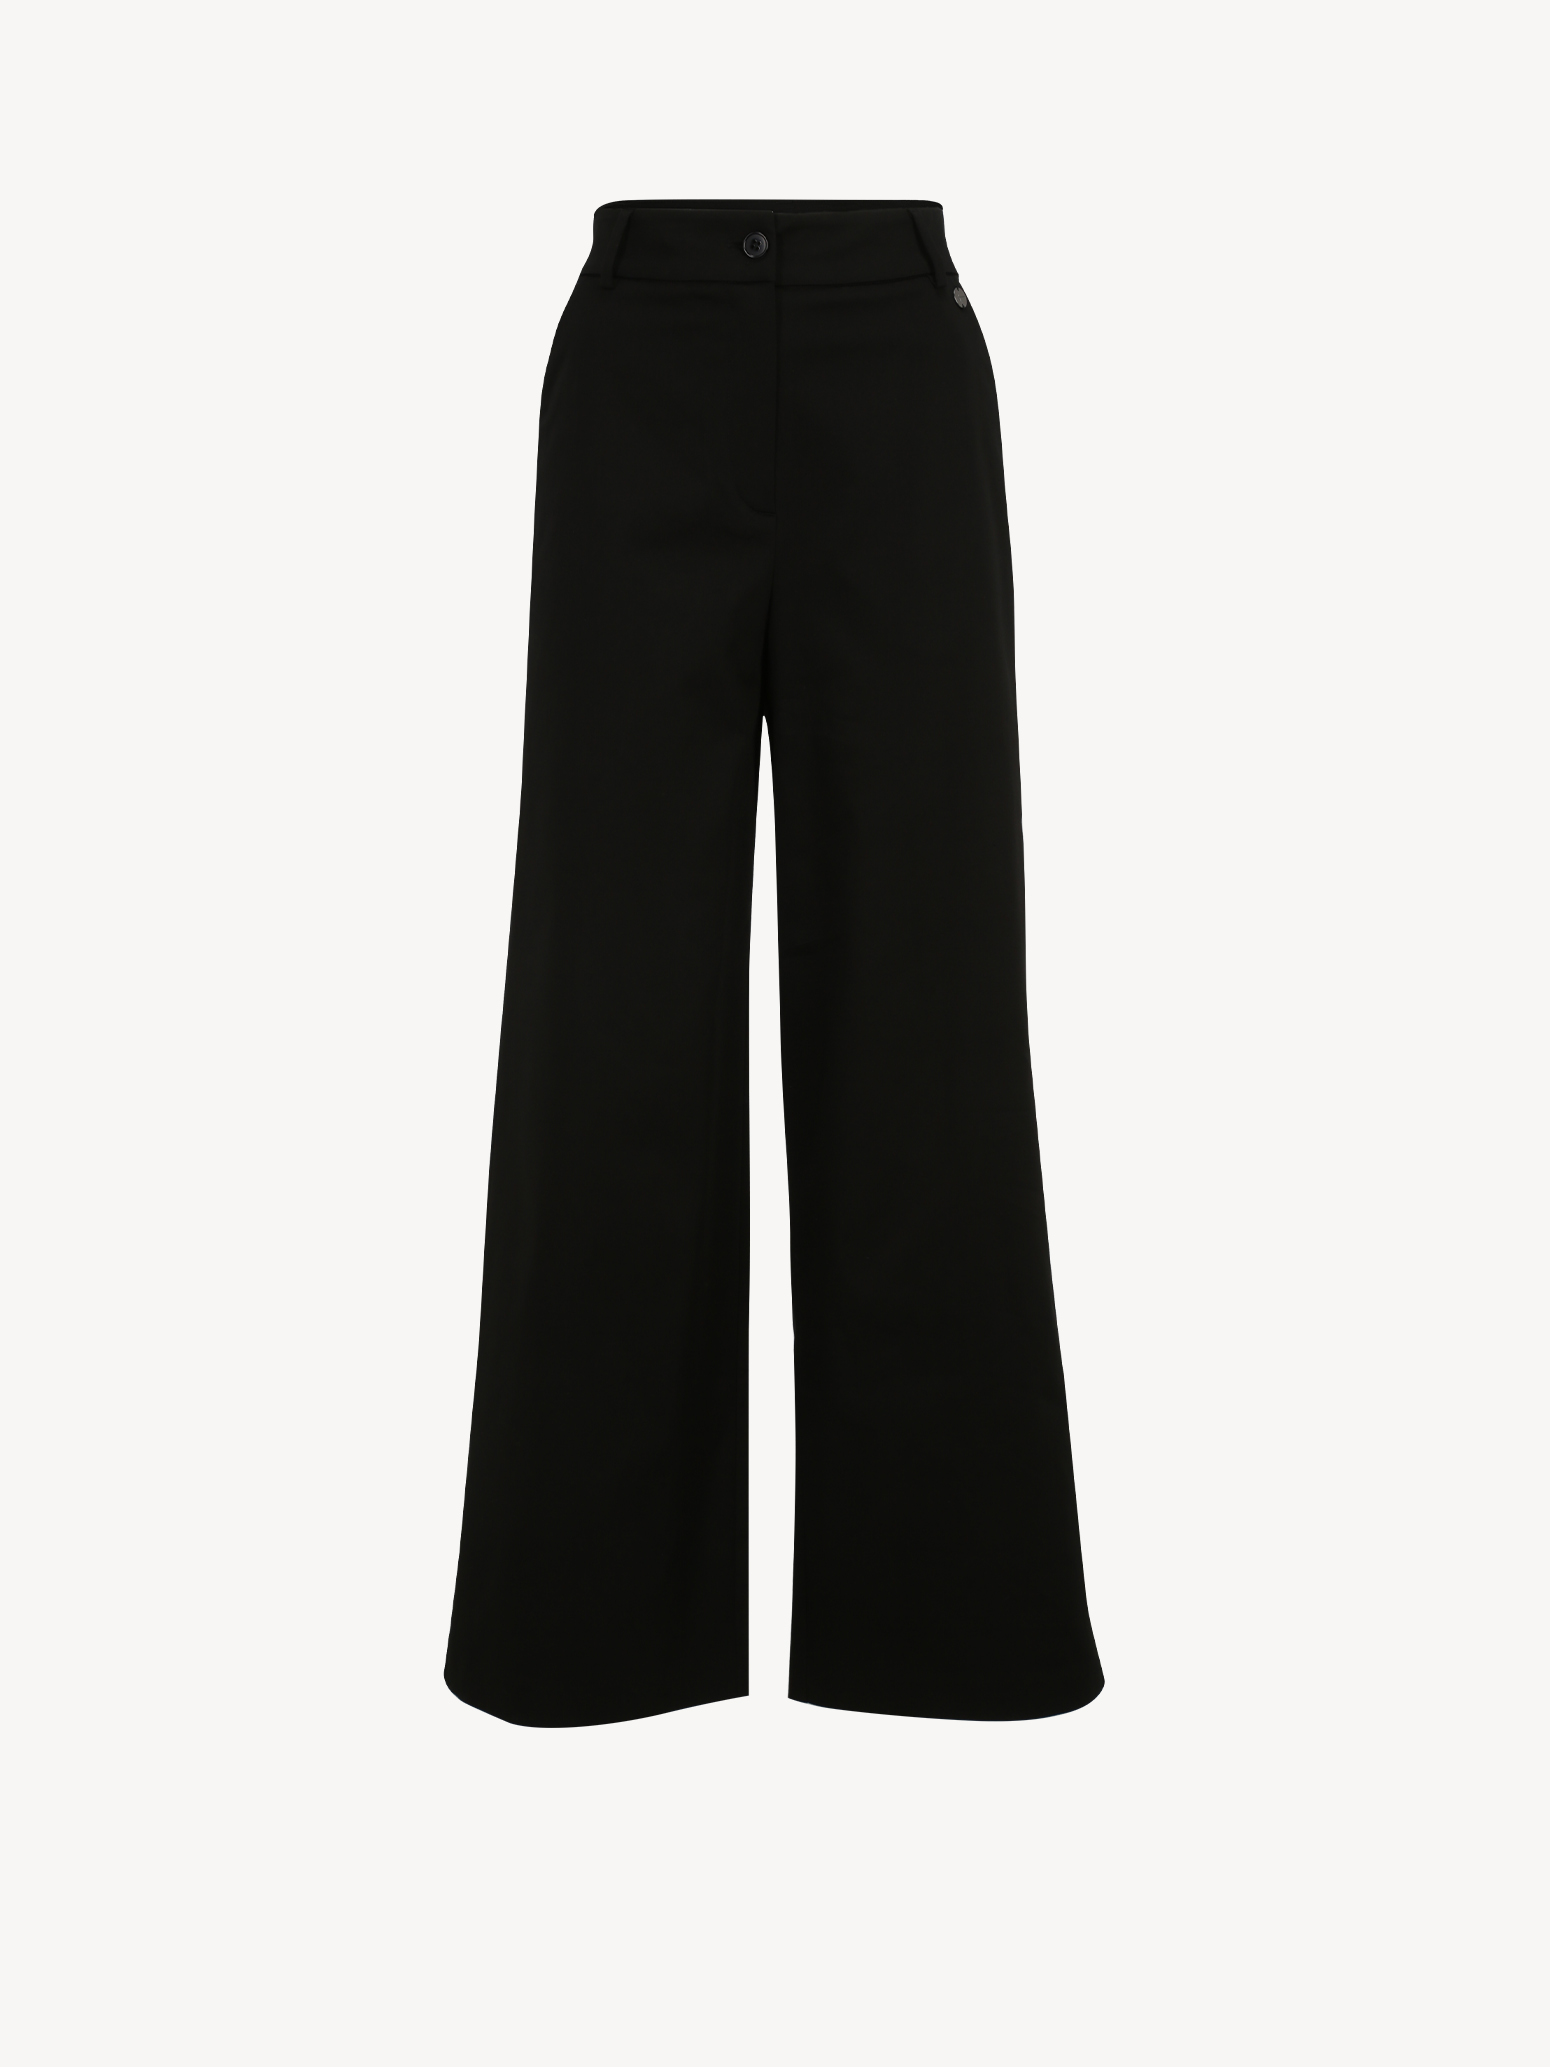 Trousers - black TAW0483-80009: Buy Tamaris Christmas outfits online!